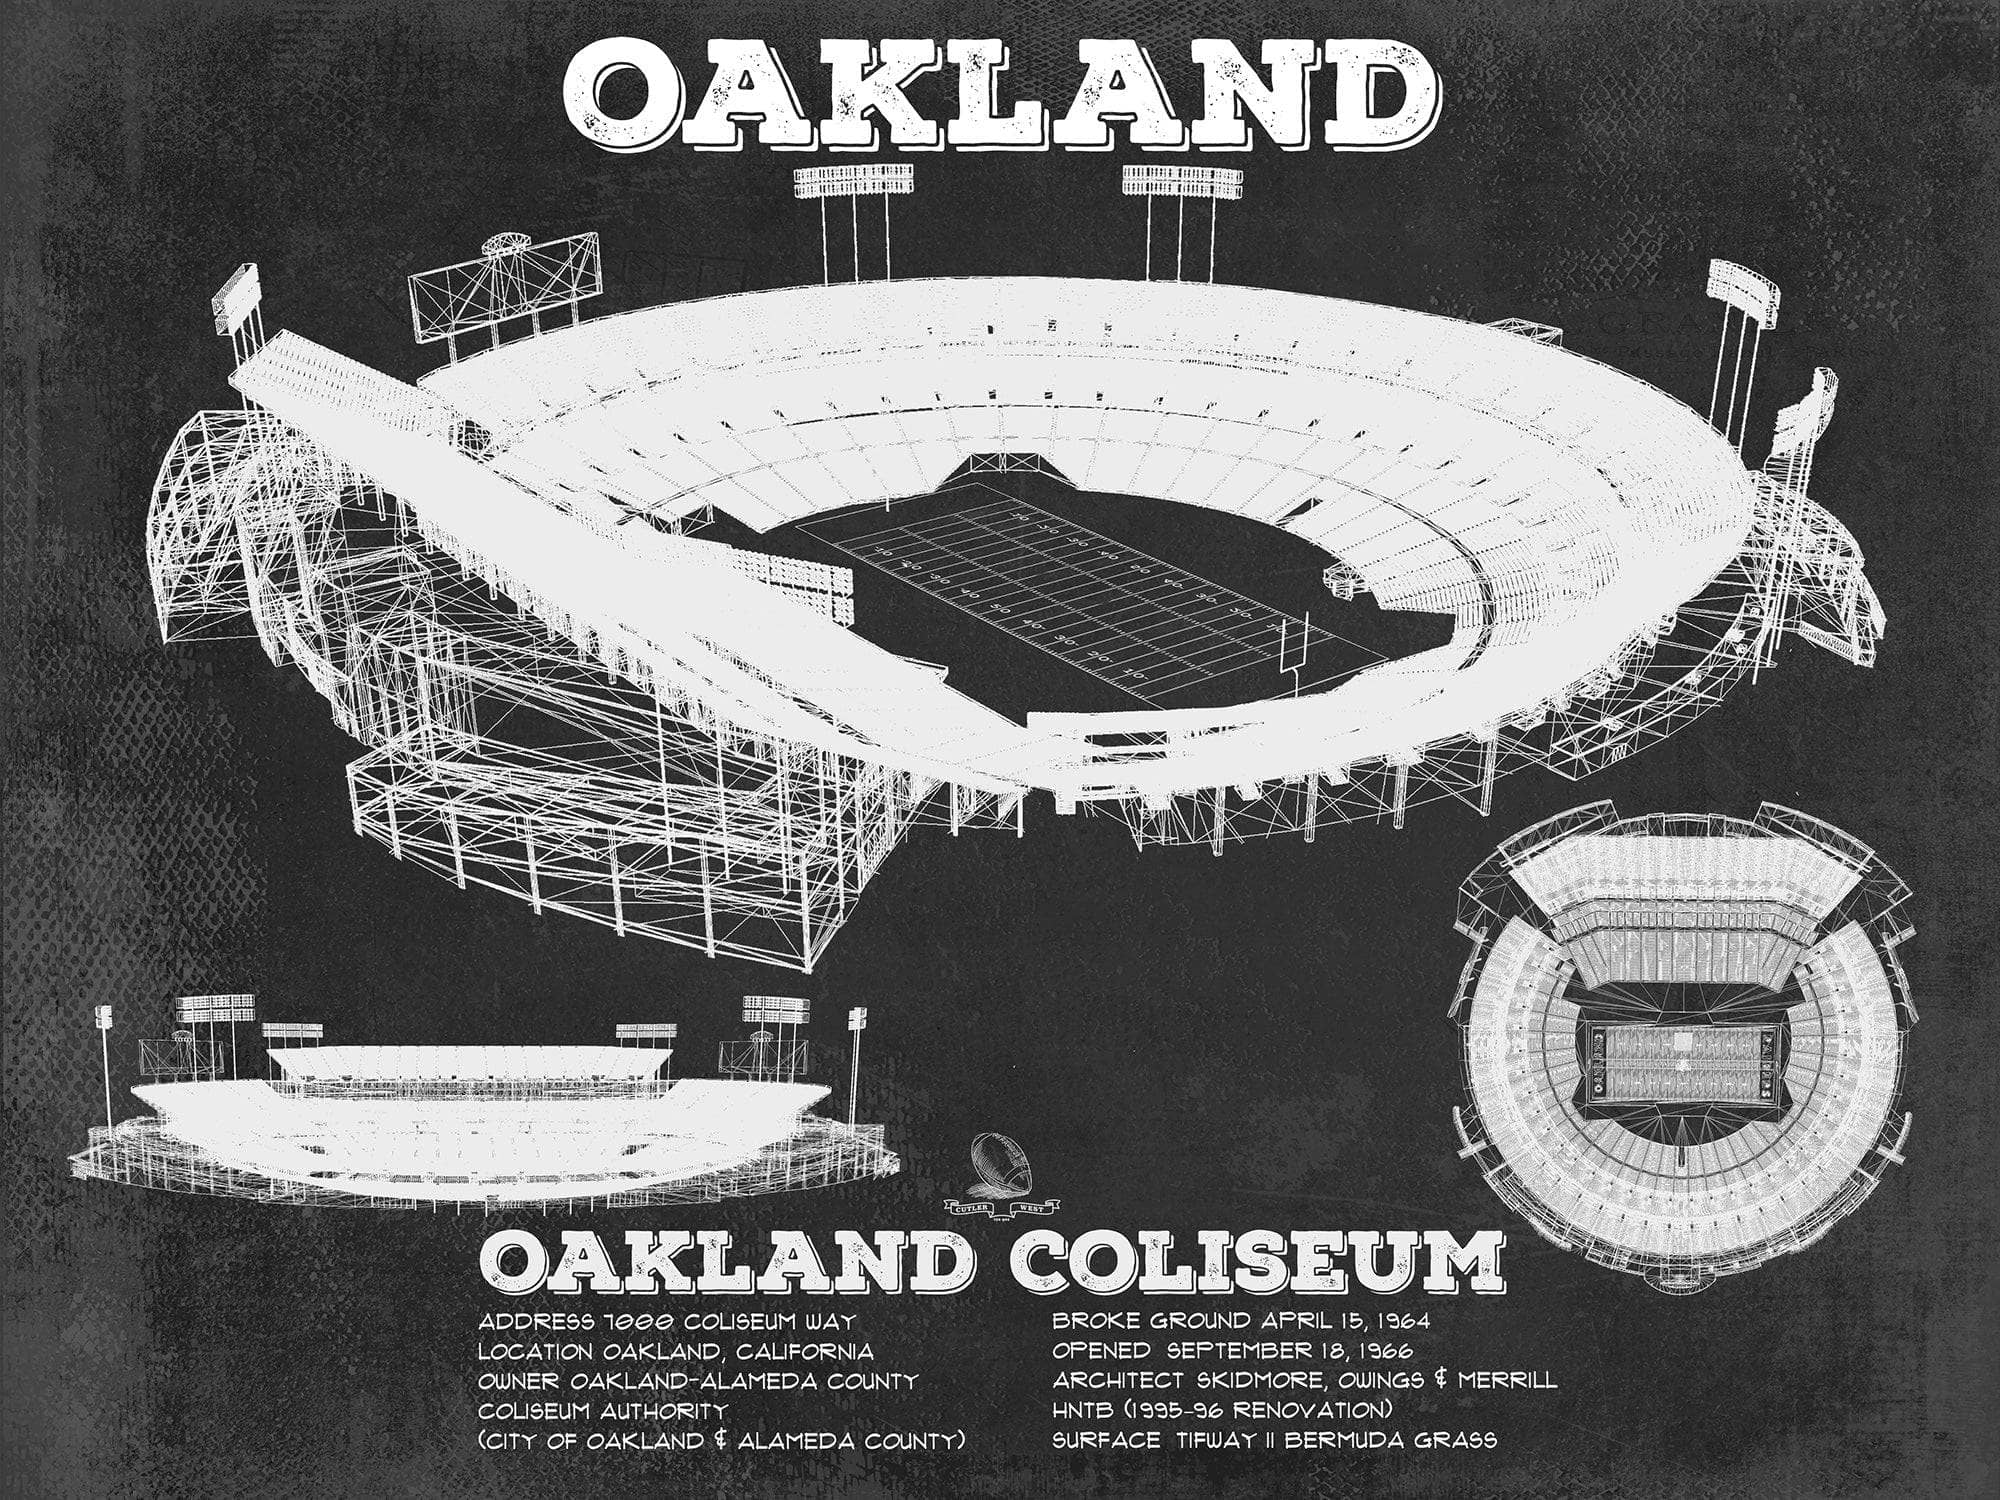 Cutler West Pro Football Collection 14" x 11" / Unframed Oakland Raiders Team Color Alameda County Coliseum Seating Chart - Vintage Football Print 920787395-TOP_70493